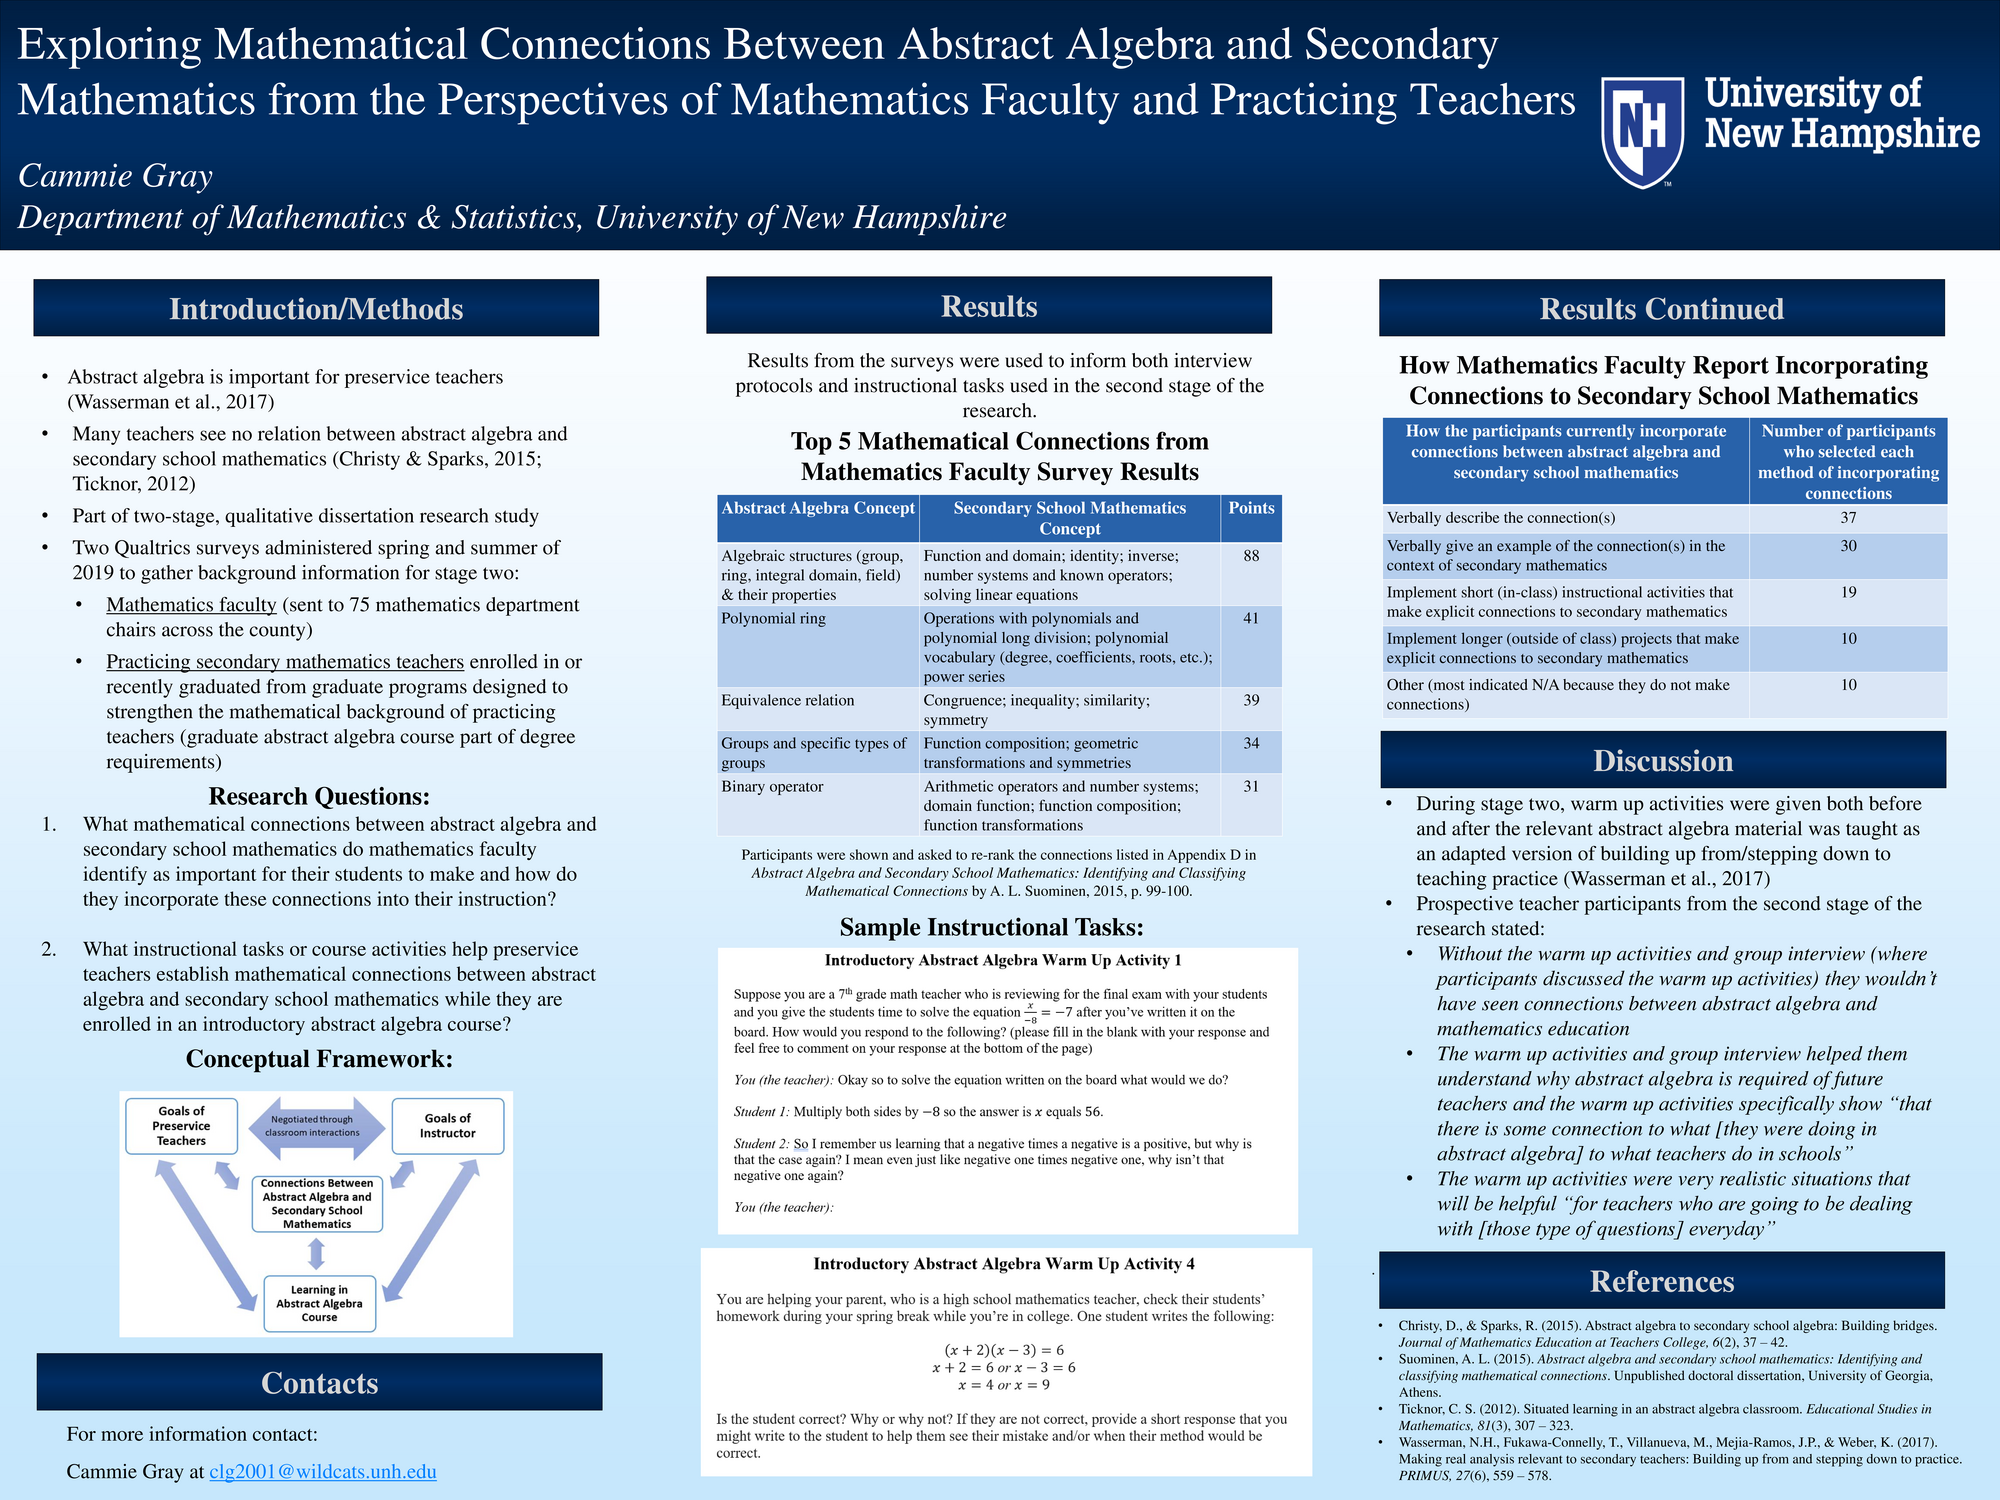 poster presentation abstract